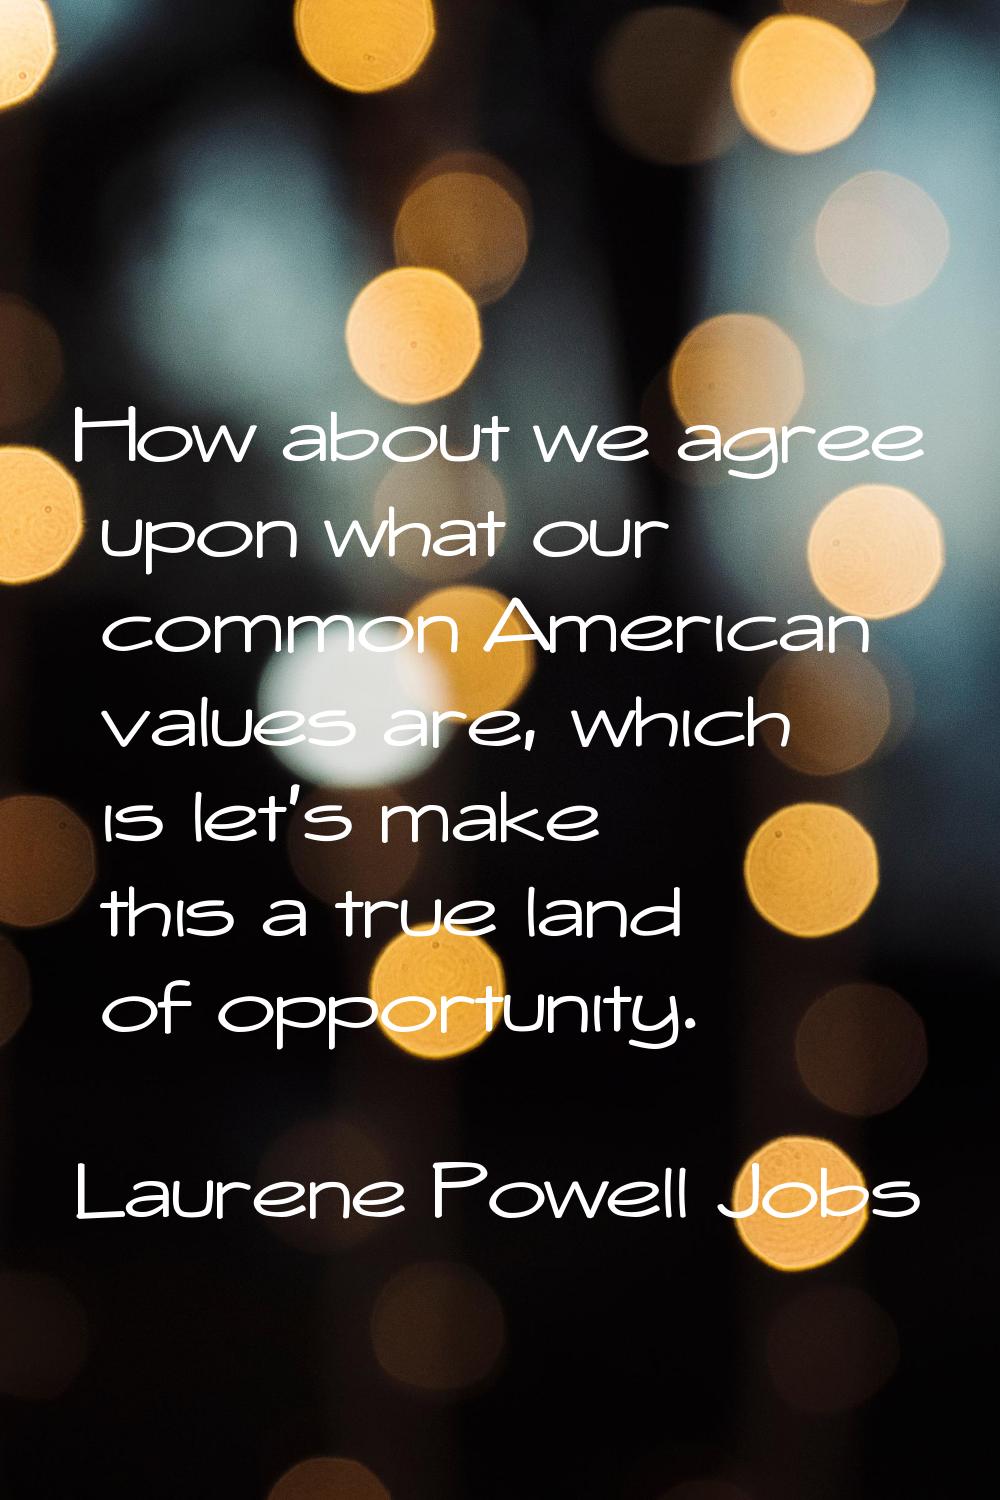 How about we agree upon what our common American values are, which is let's make this a true land o